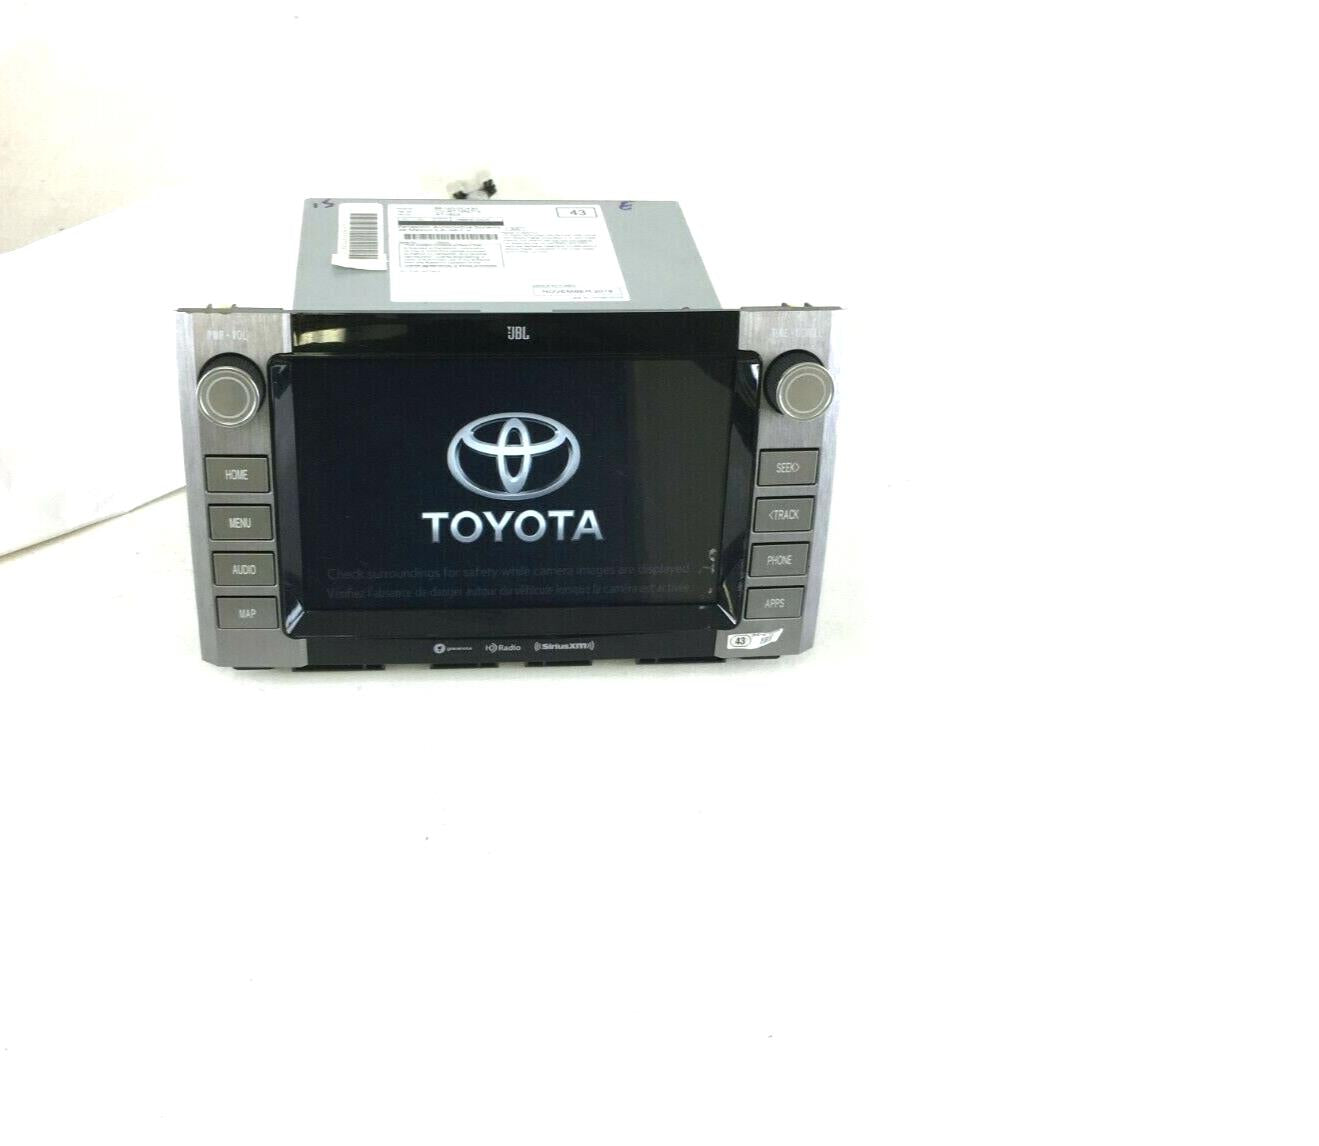 2020 Toyota Tundra RECEIVER ASSEMBLY, RADIO & DISPLAY 86140-0C430 AWESOME!!